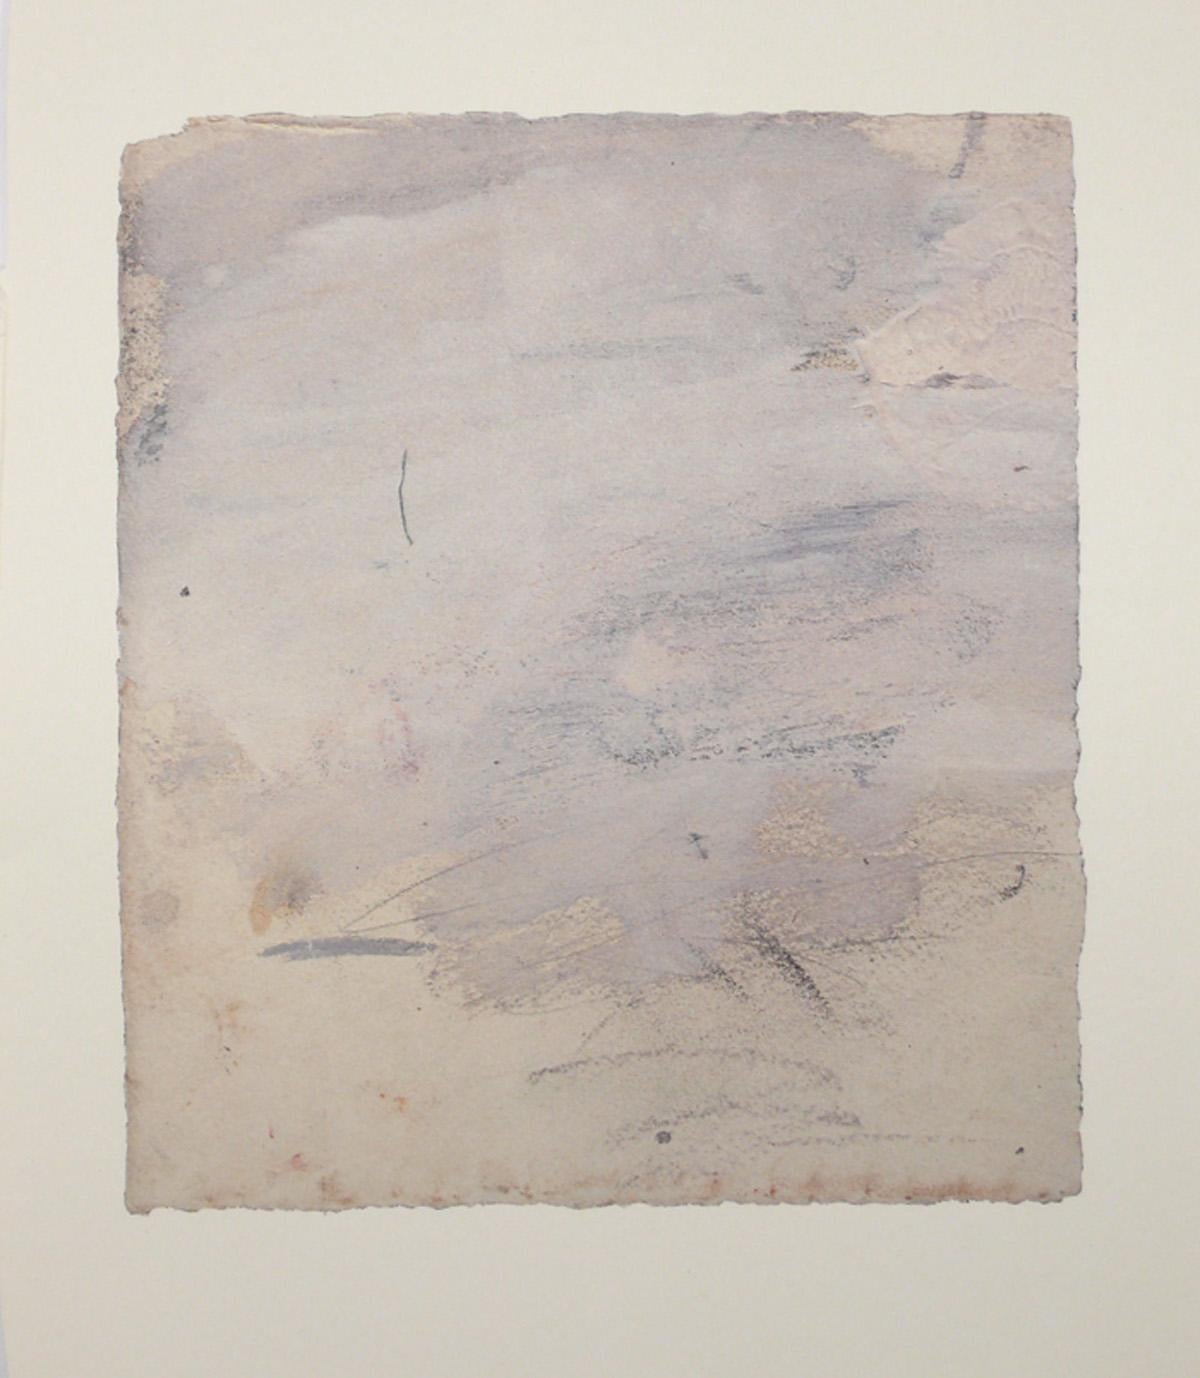 Group of Eight Abstract Photolithographs on Vellum by Cy Twombly, from the limited edition 